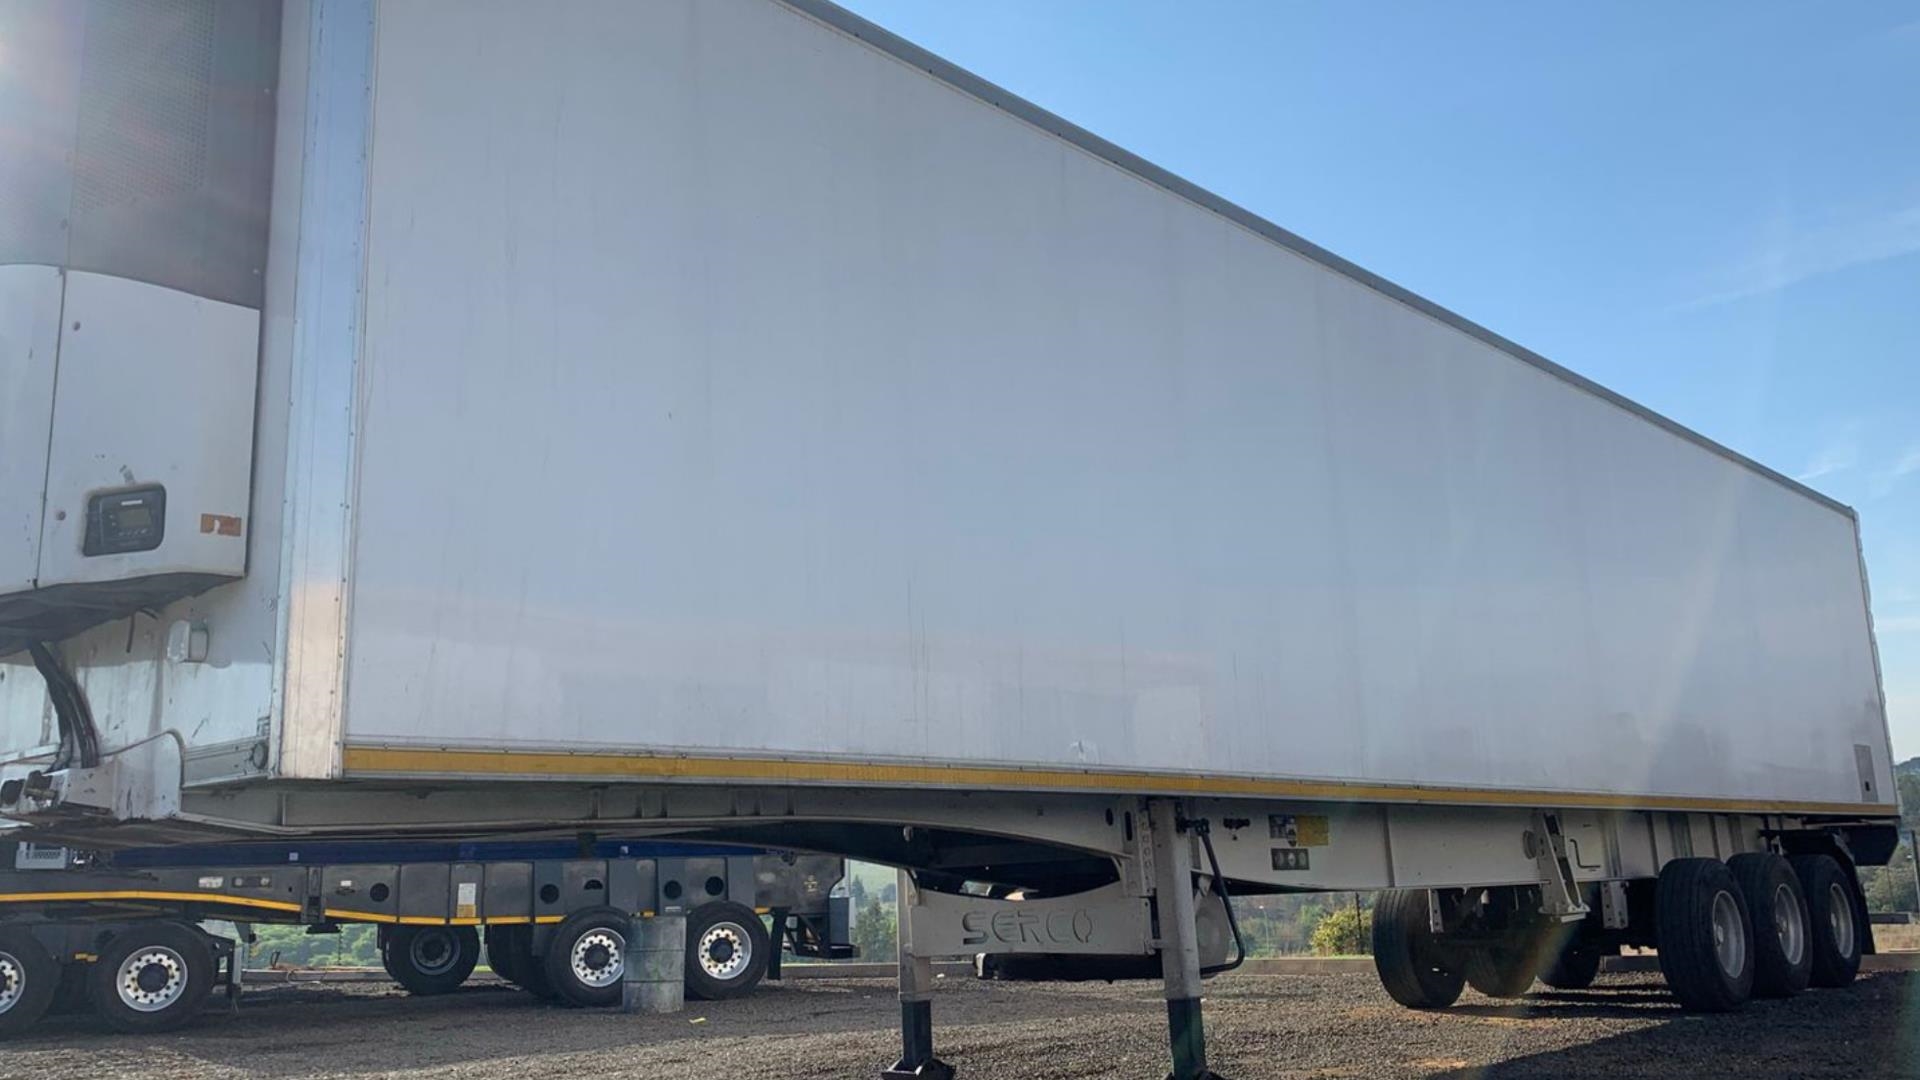 Serco Trailers 2014 Serco Fridge Trailer for Sale 2014 for sale by Truck and Plant Connection | Truck & Trailer Marketplace